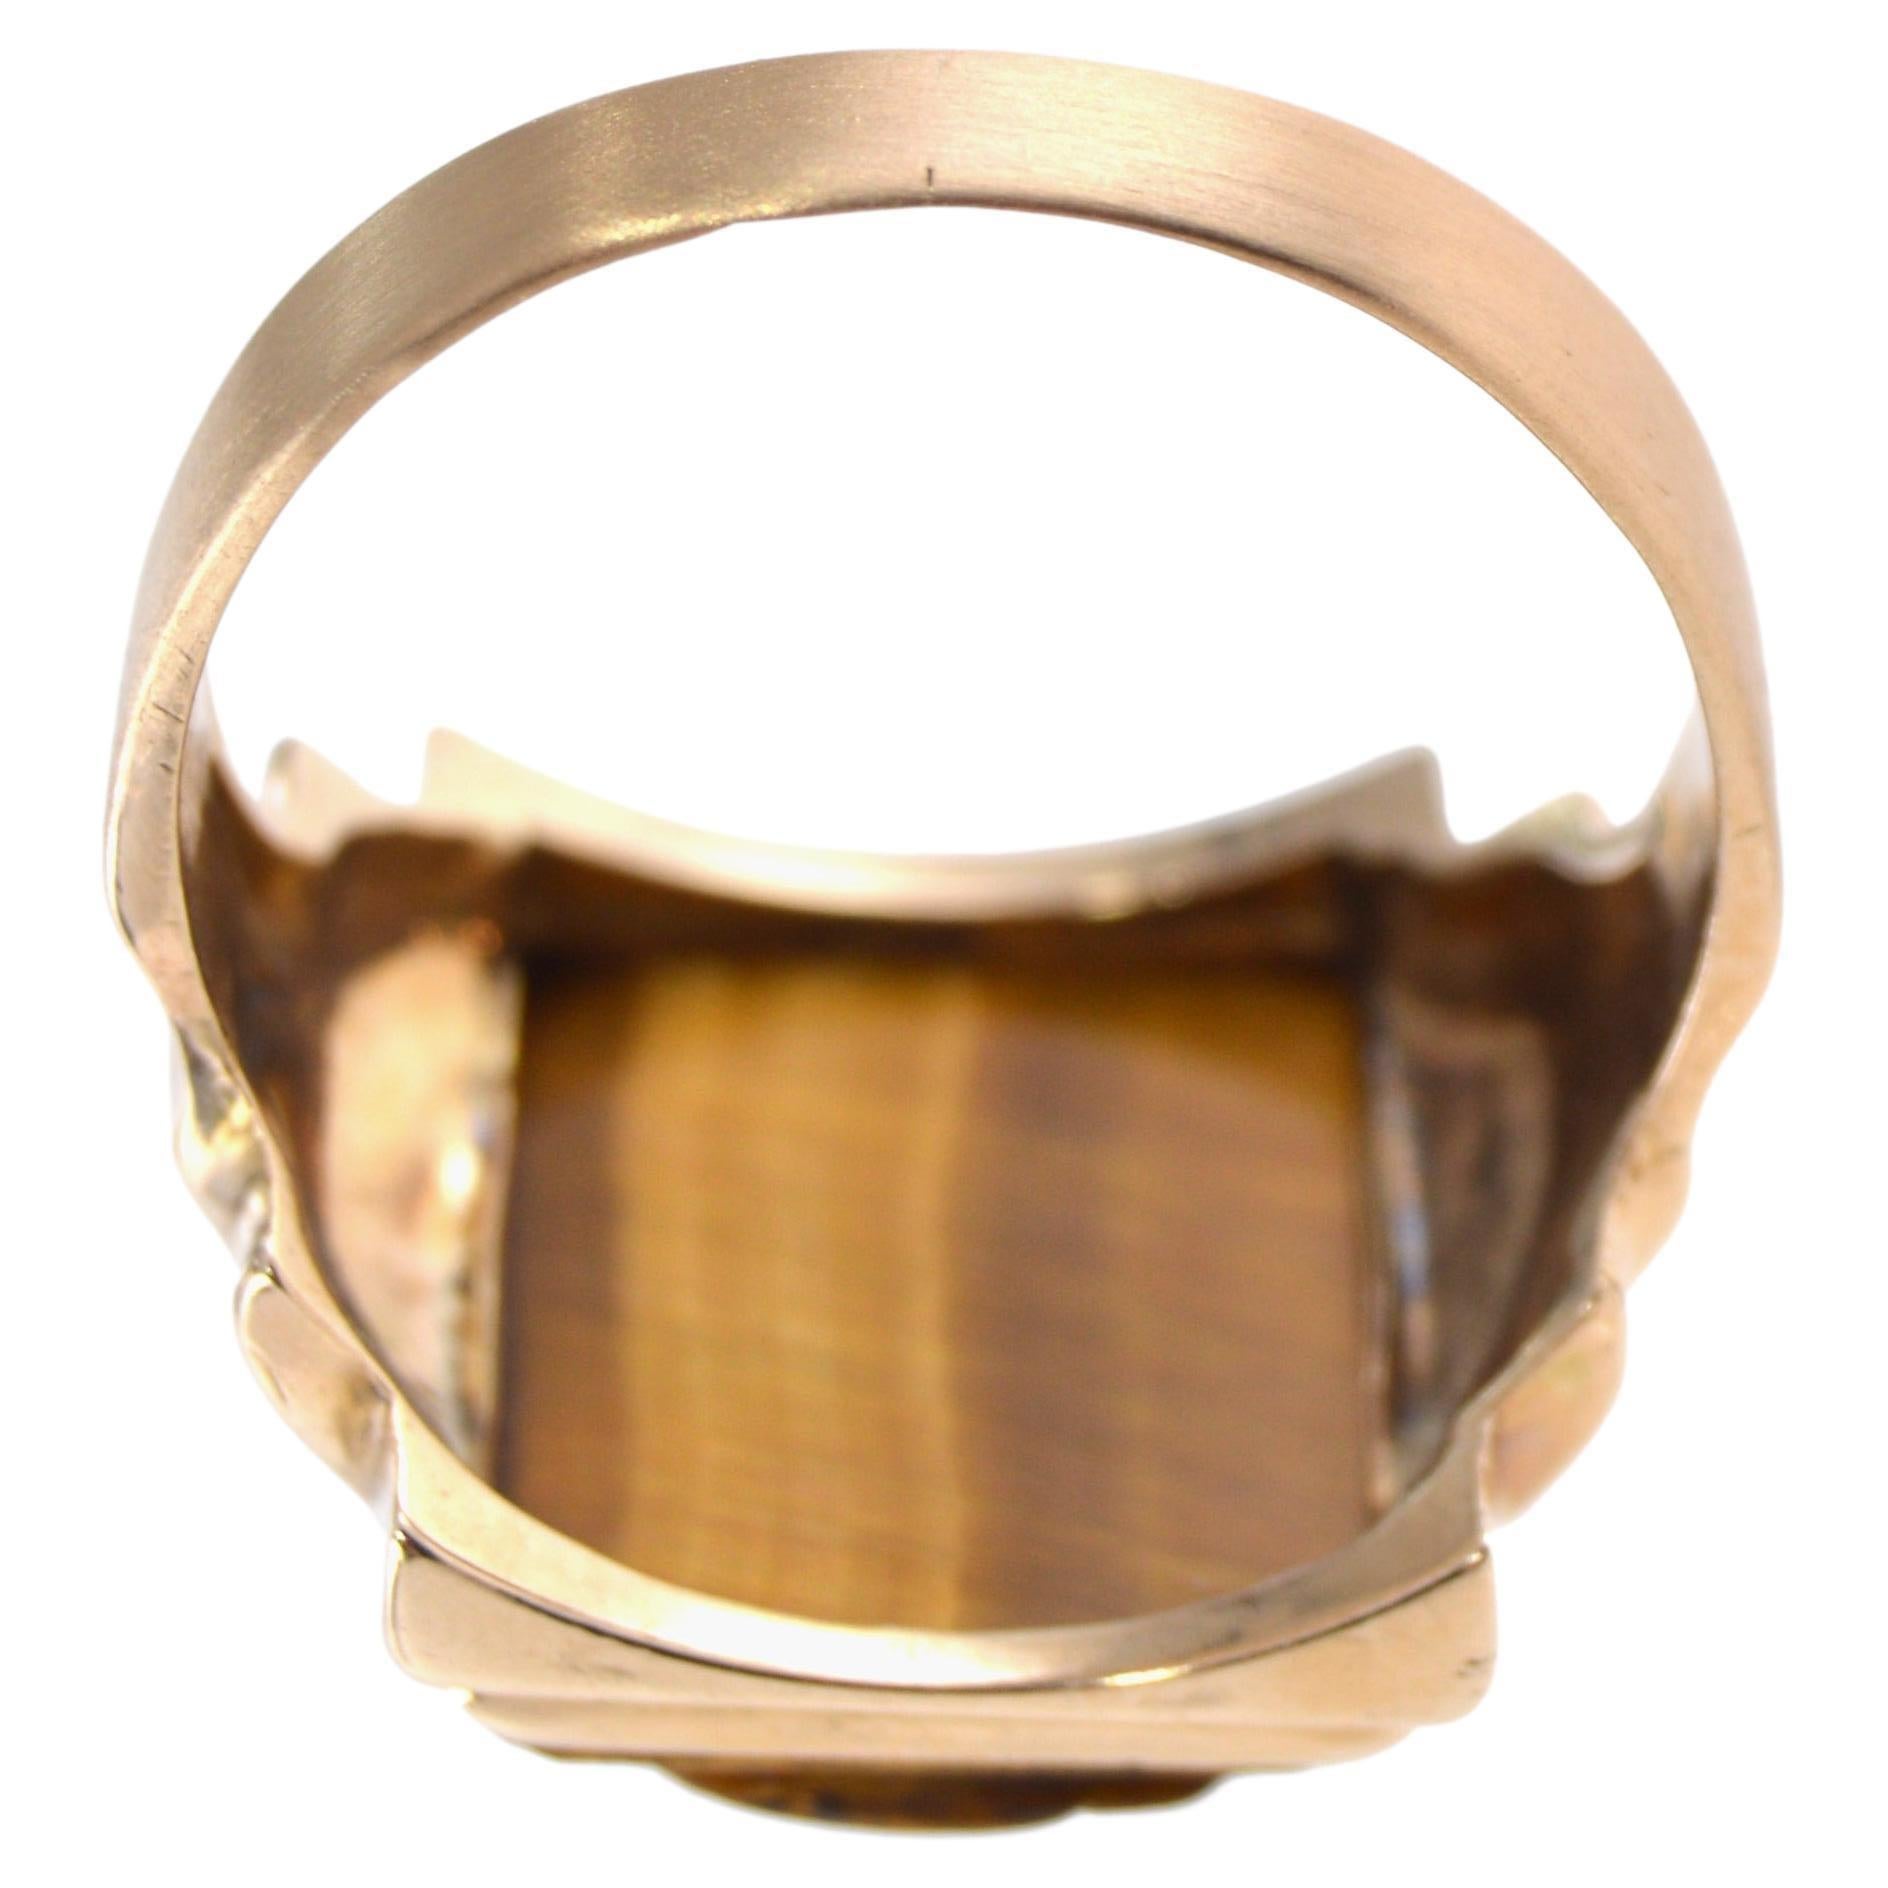 Unisex Art Deco 10kt. Solid Gold Tiger Eye Hand Constructed Ring from 1940s For Sale 6